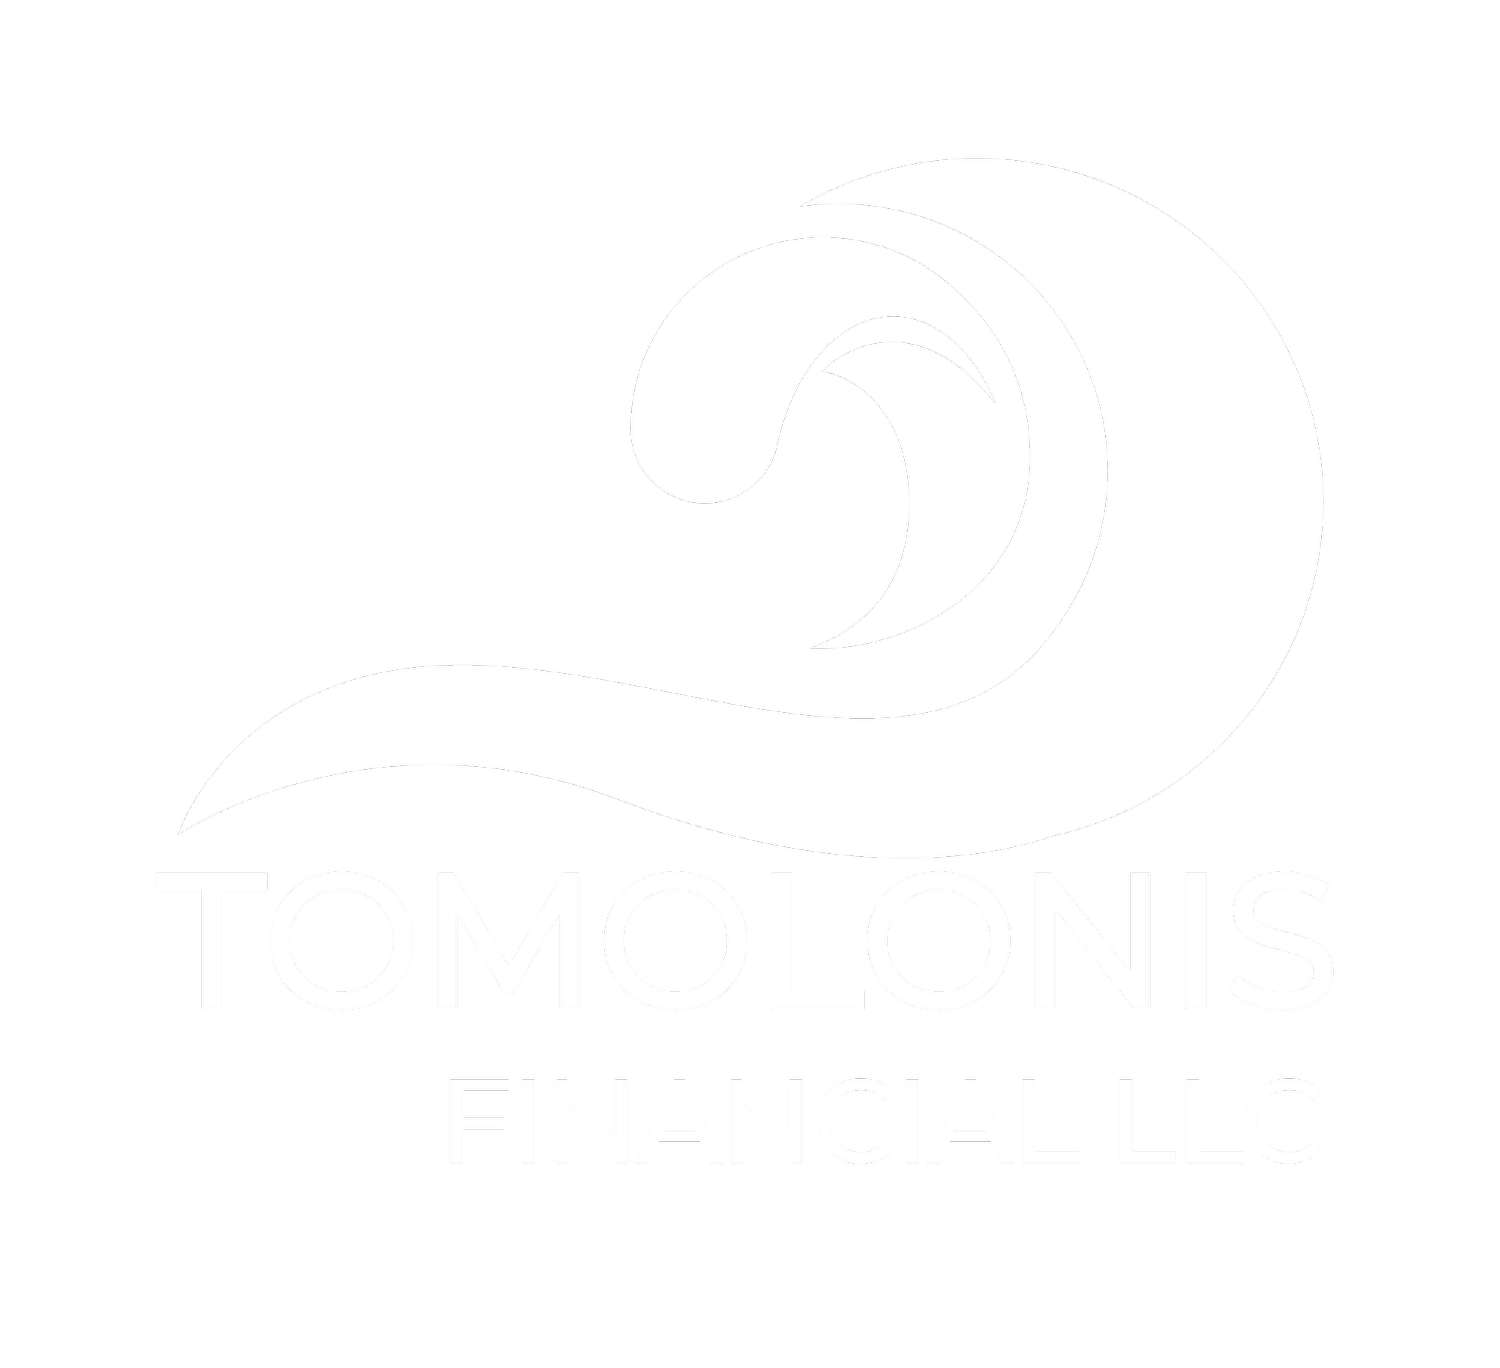 Tomolonis Financial LLC offers Financial Planning and Investment Management Services for Hudson and Ocean Counties in New Jersey.